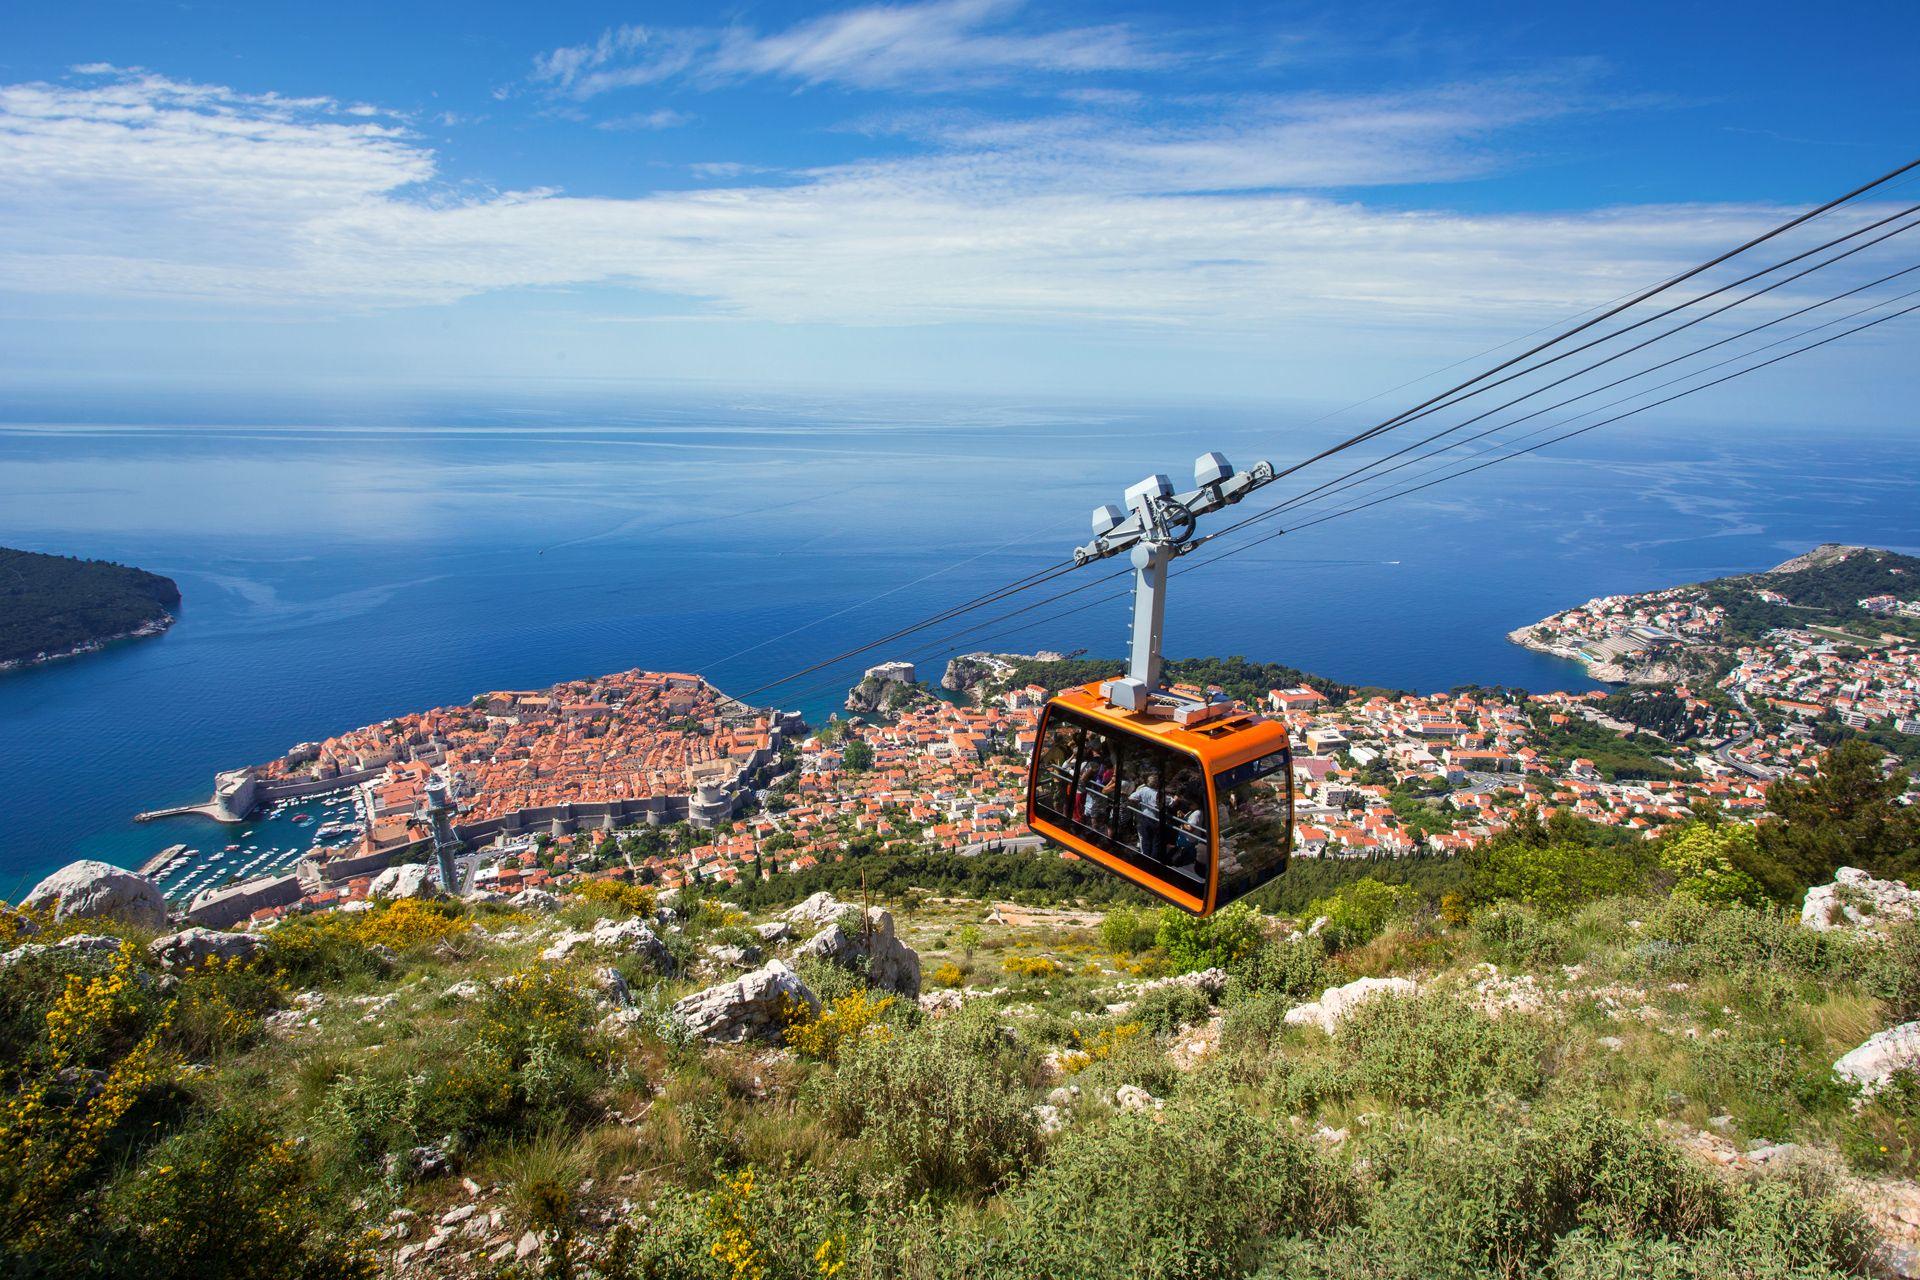 Ride the Dubrovnik Cable Car.